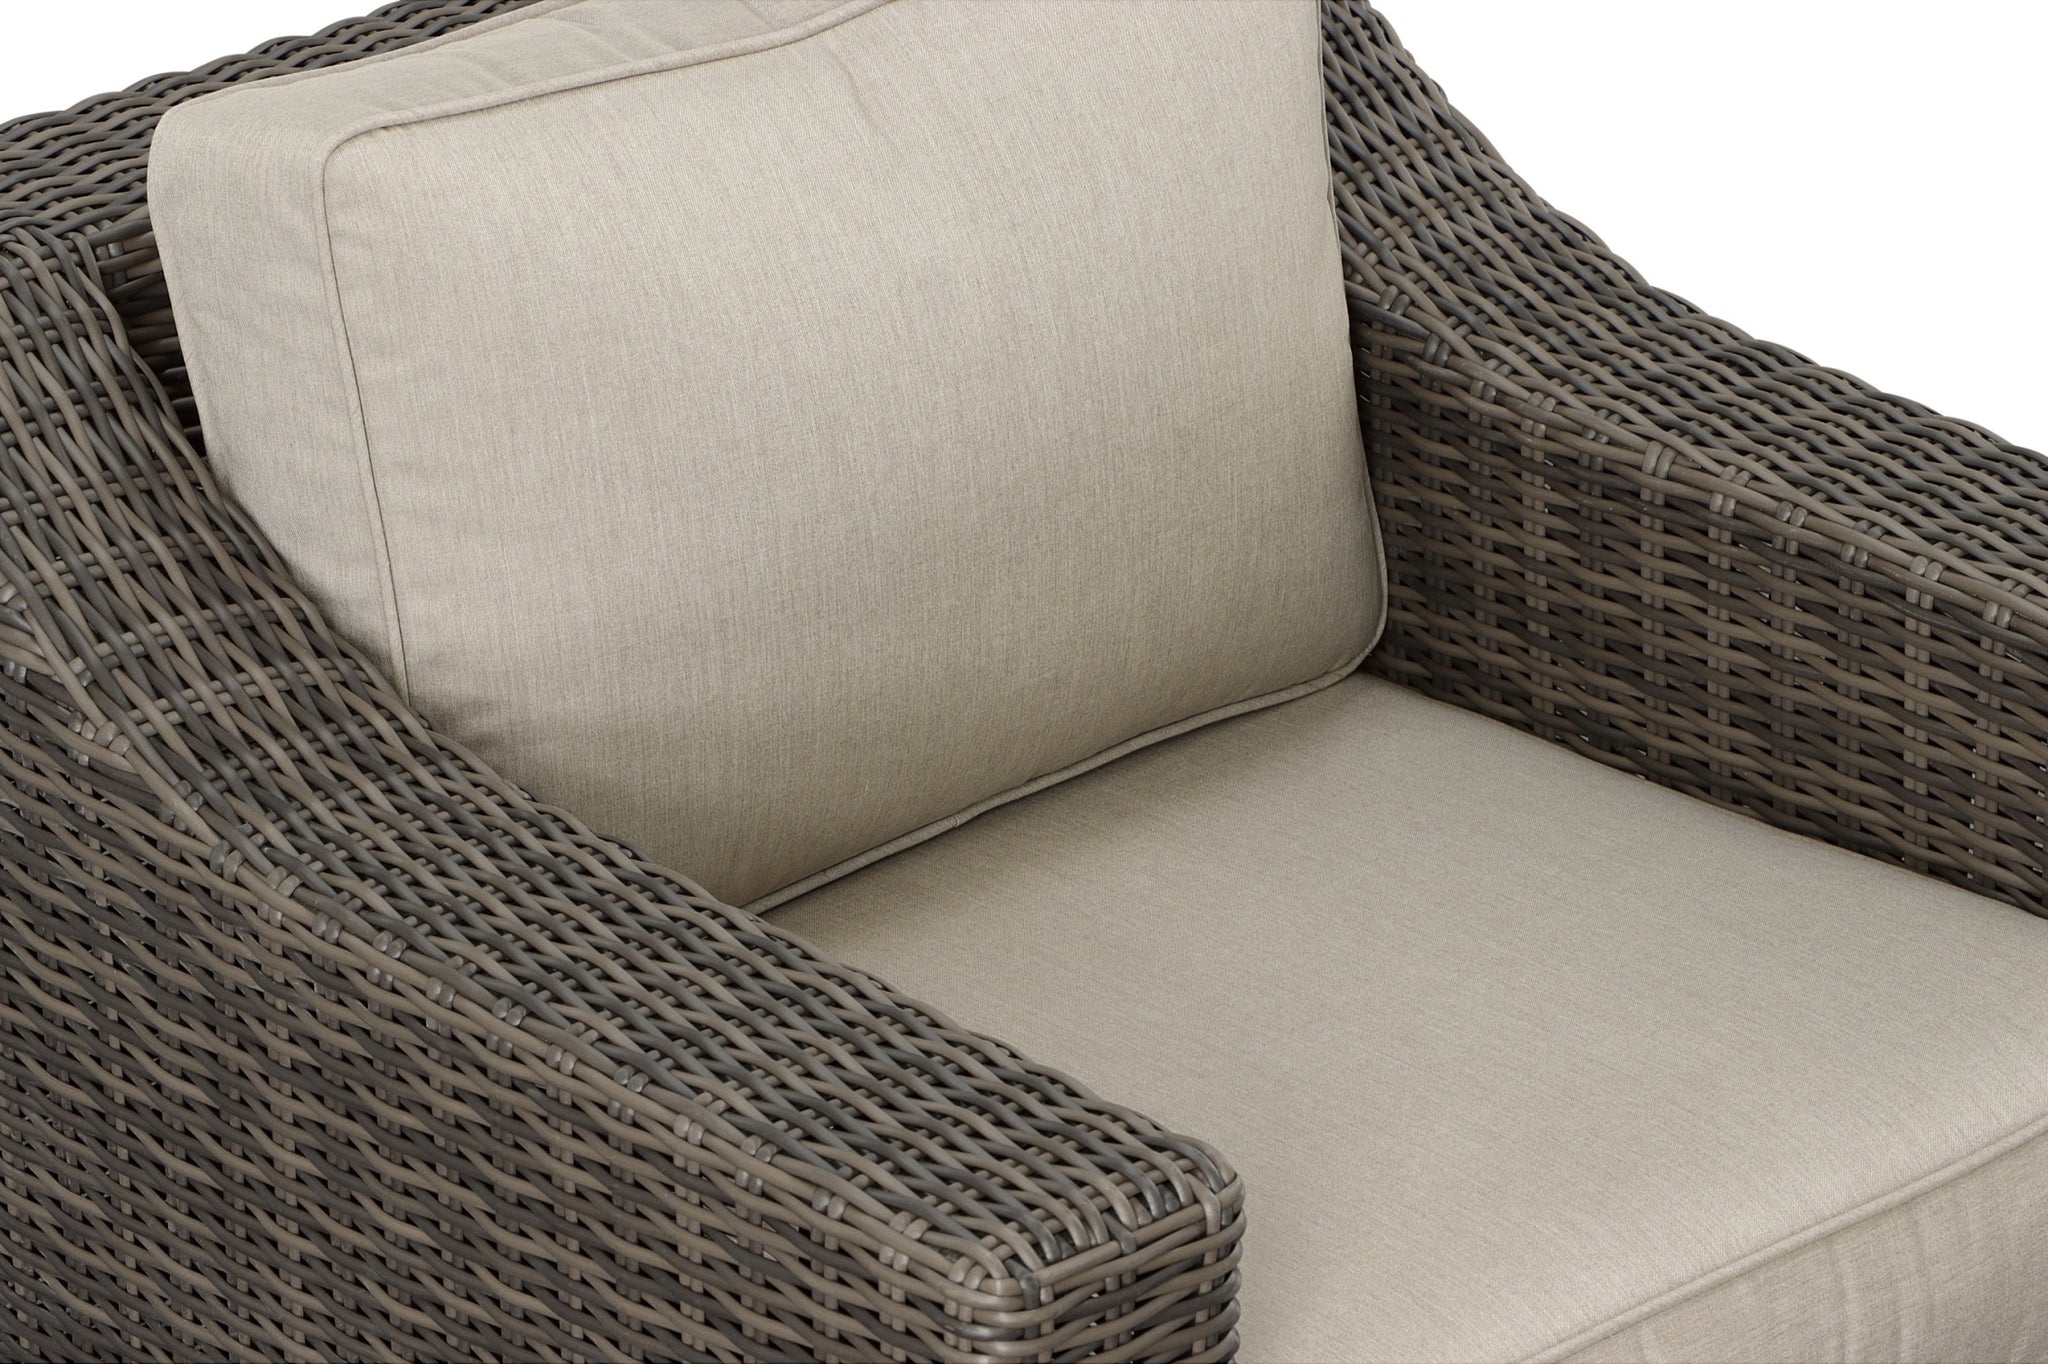 Luxurious Outdoor Lounge Chair Thick Cushioning,